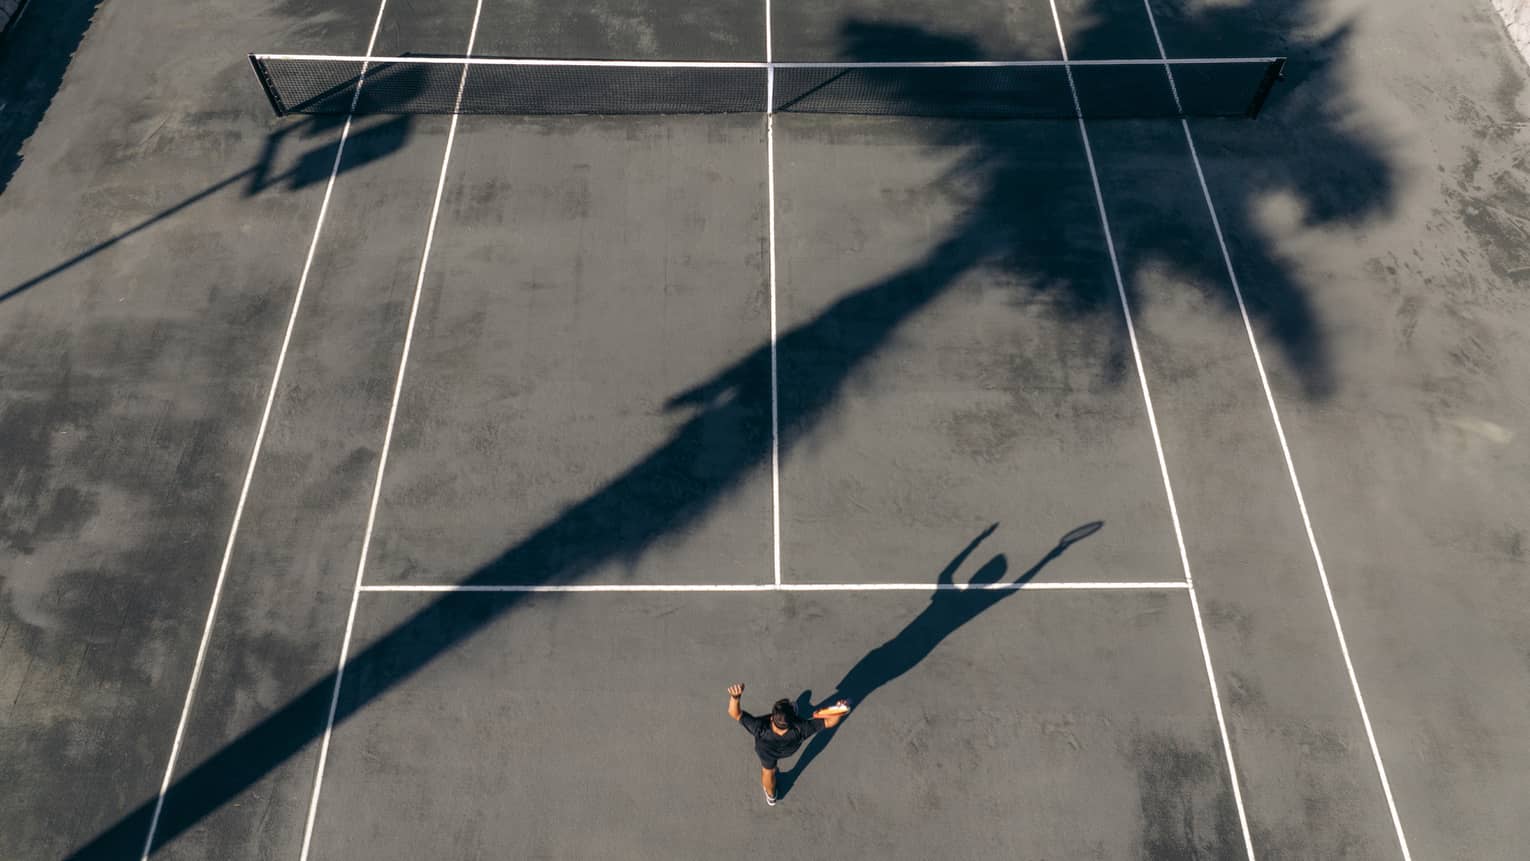 Aerial view of tennis player serving the ball on a clay court